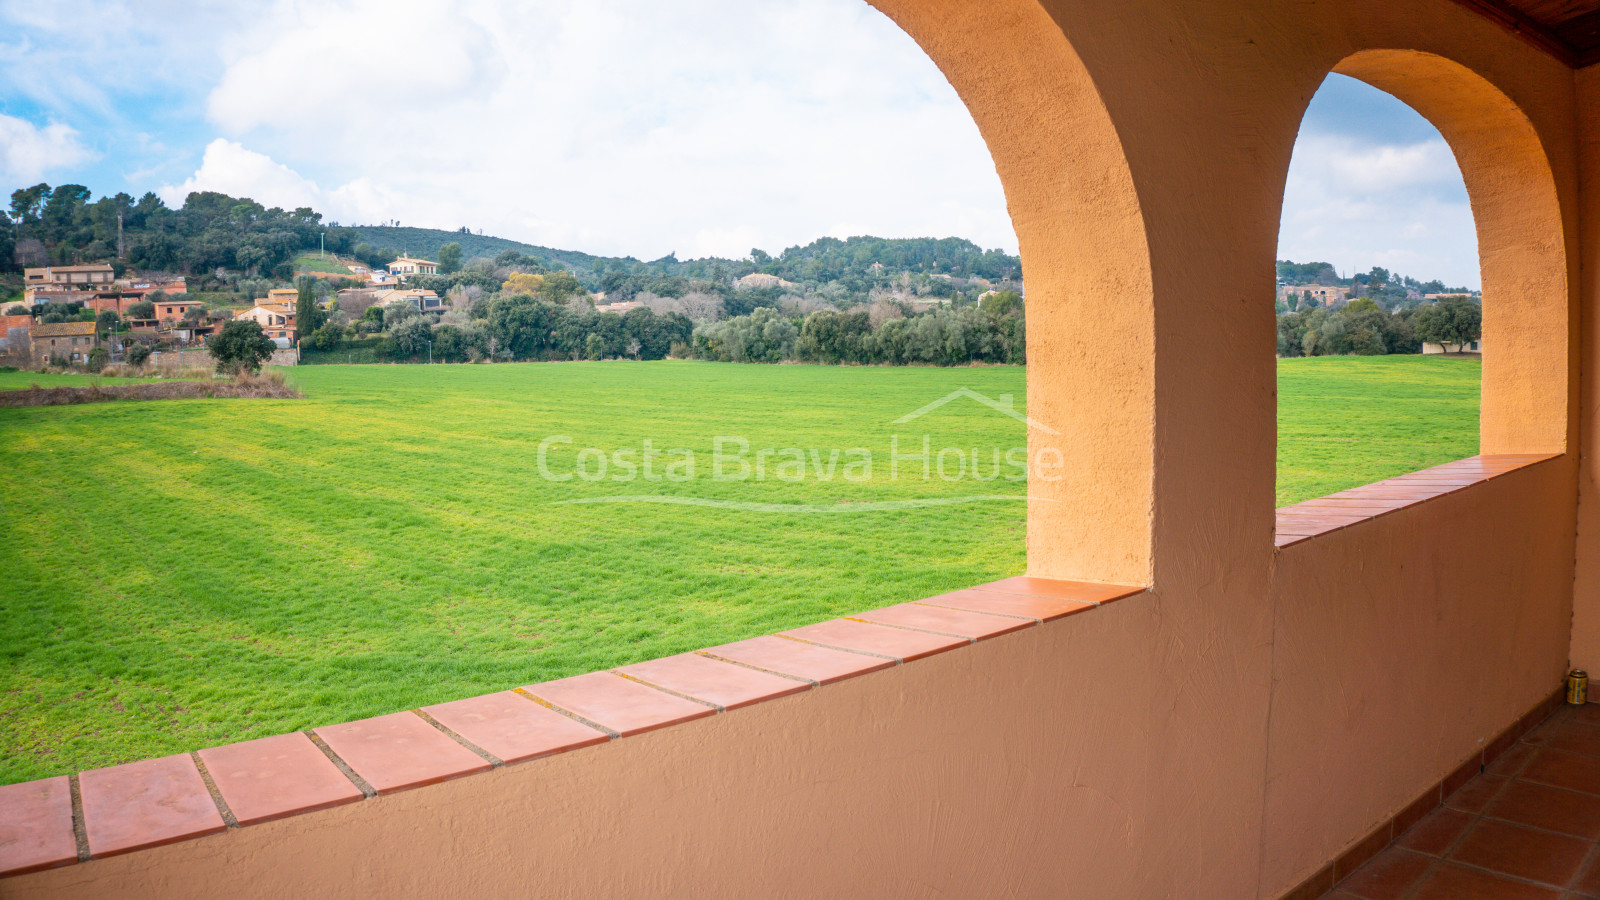 Property for sale in Foixà, very close to the castle, with large plot of land and 2 houses